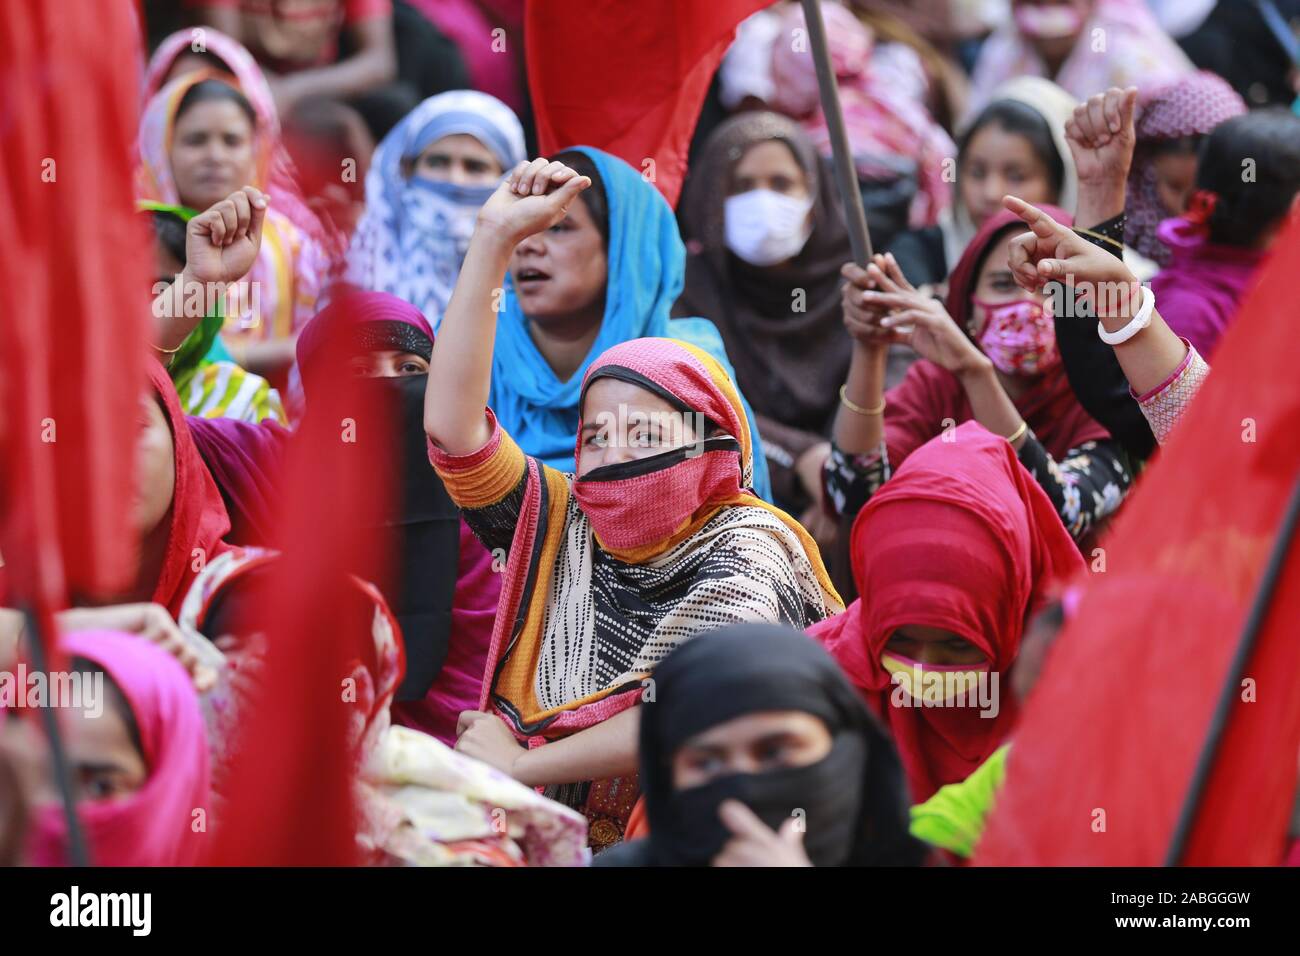 Dhaka, Bangladesh. 27th Nov, 2019. November 27, 2019, Dhaka, Bangladesh: Bangladeshi garments workers from Interco Design Limited shout slogan as they take part in a protest demanding trade union in their factory, in Dhaka, Bangladesh, November 27, 2019. Credit: ZUMA Press, Inc./Alamy Live News Stock Photo